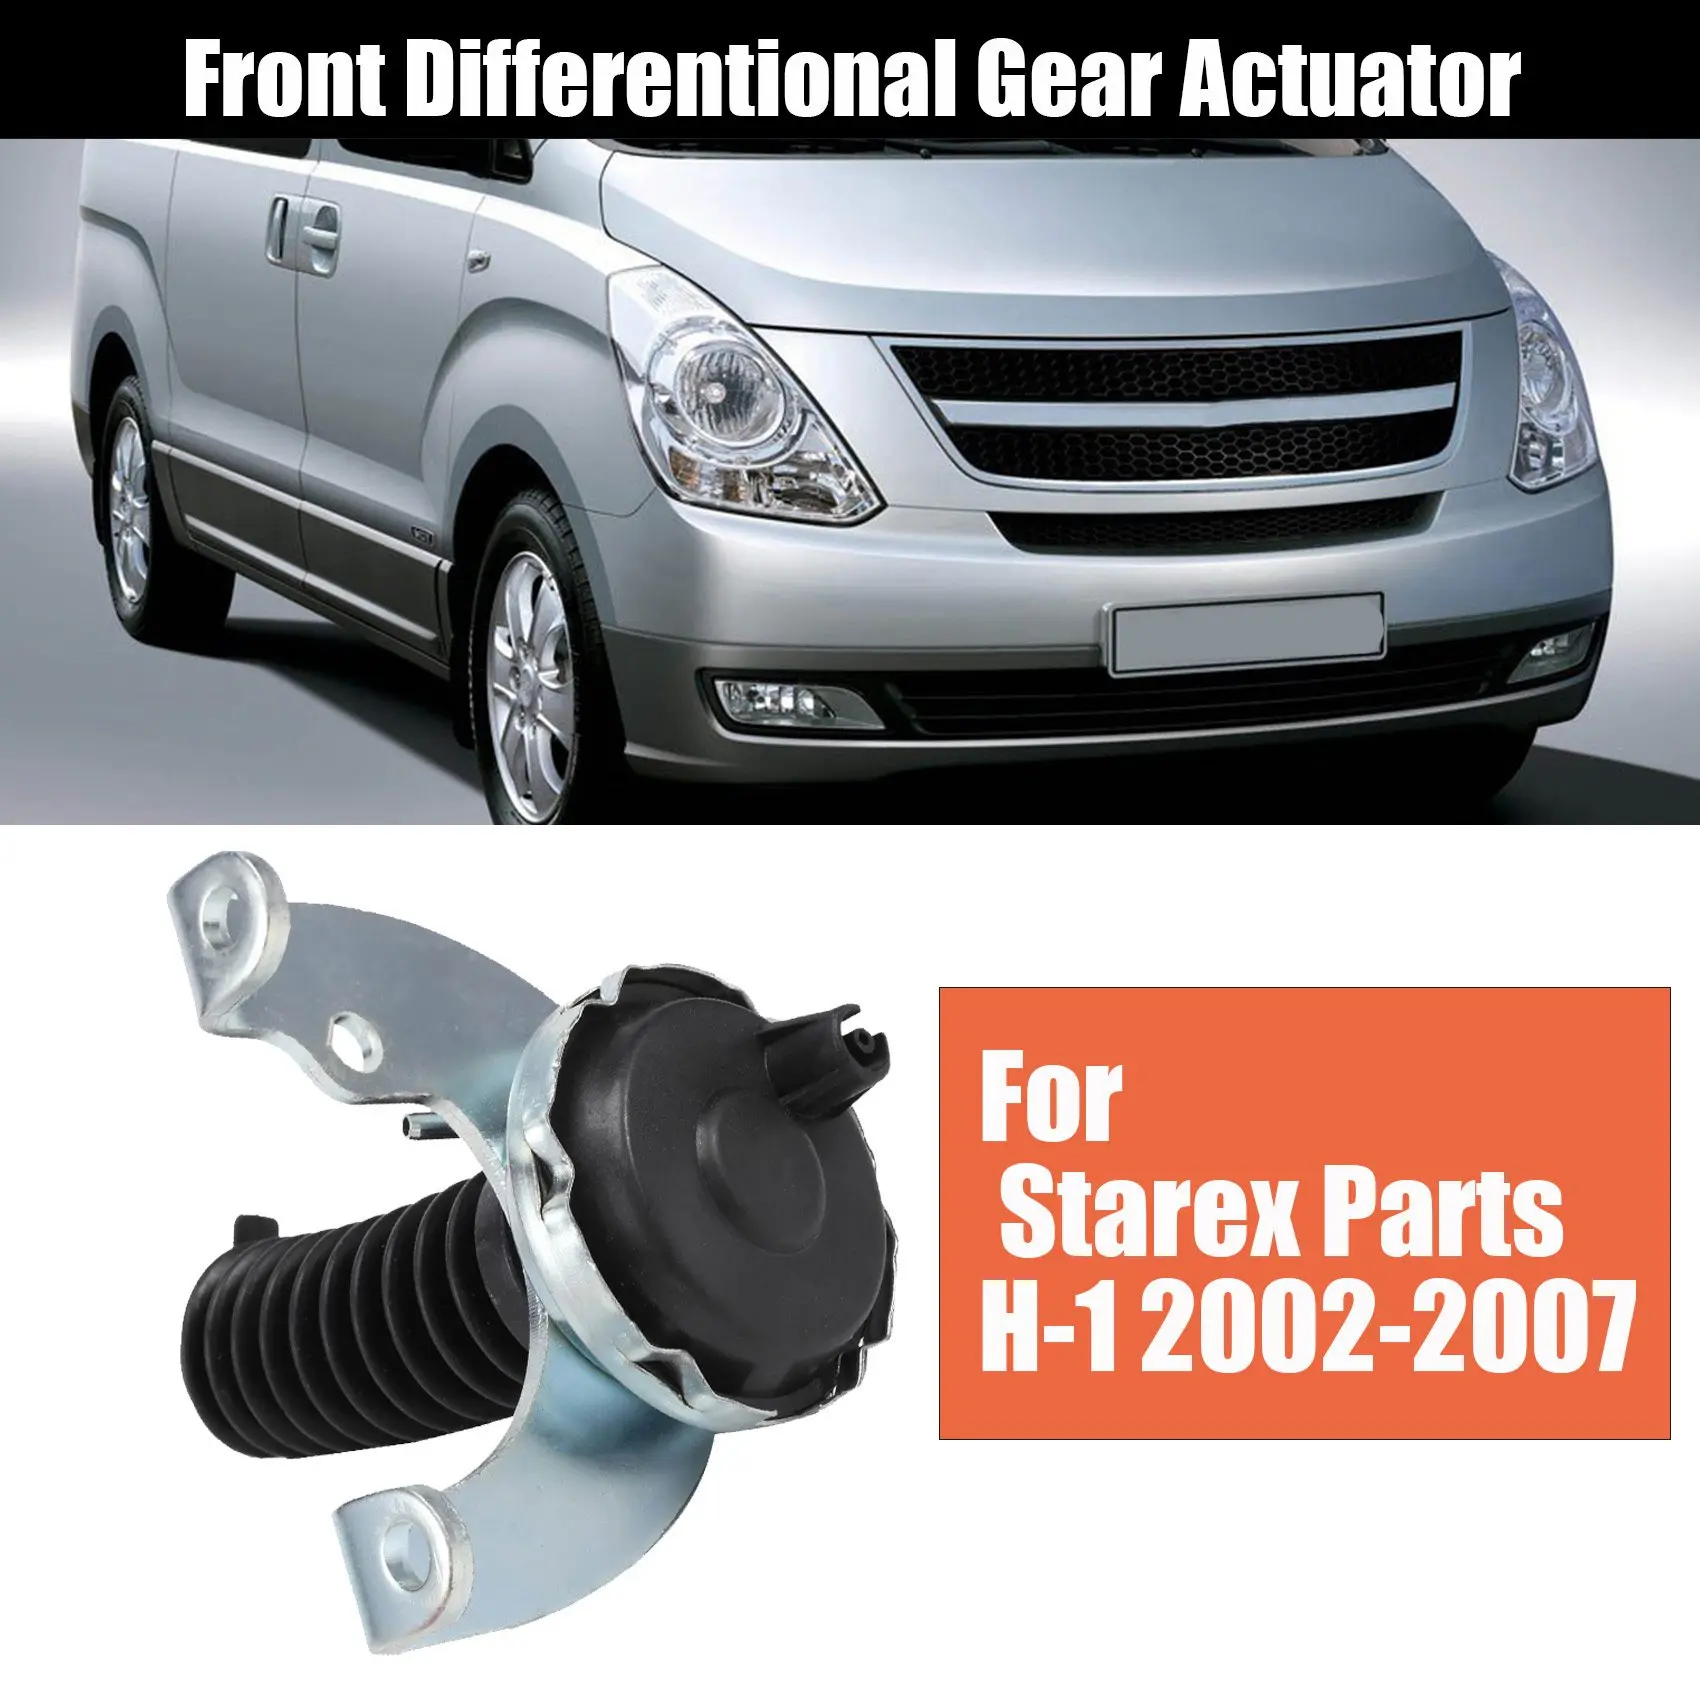 

Car Front Differentional Gear Actuator for Hyundai Starex Parts H-1 2002-2007 Terracan 01-03 51010H1000 51010-H1000